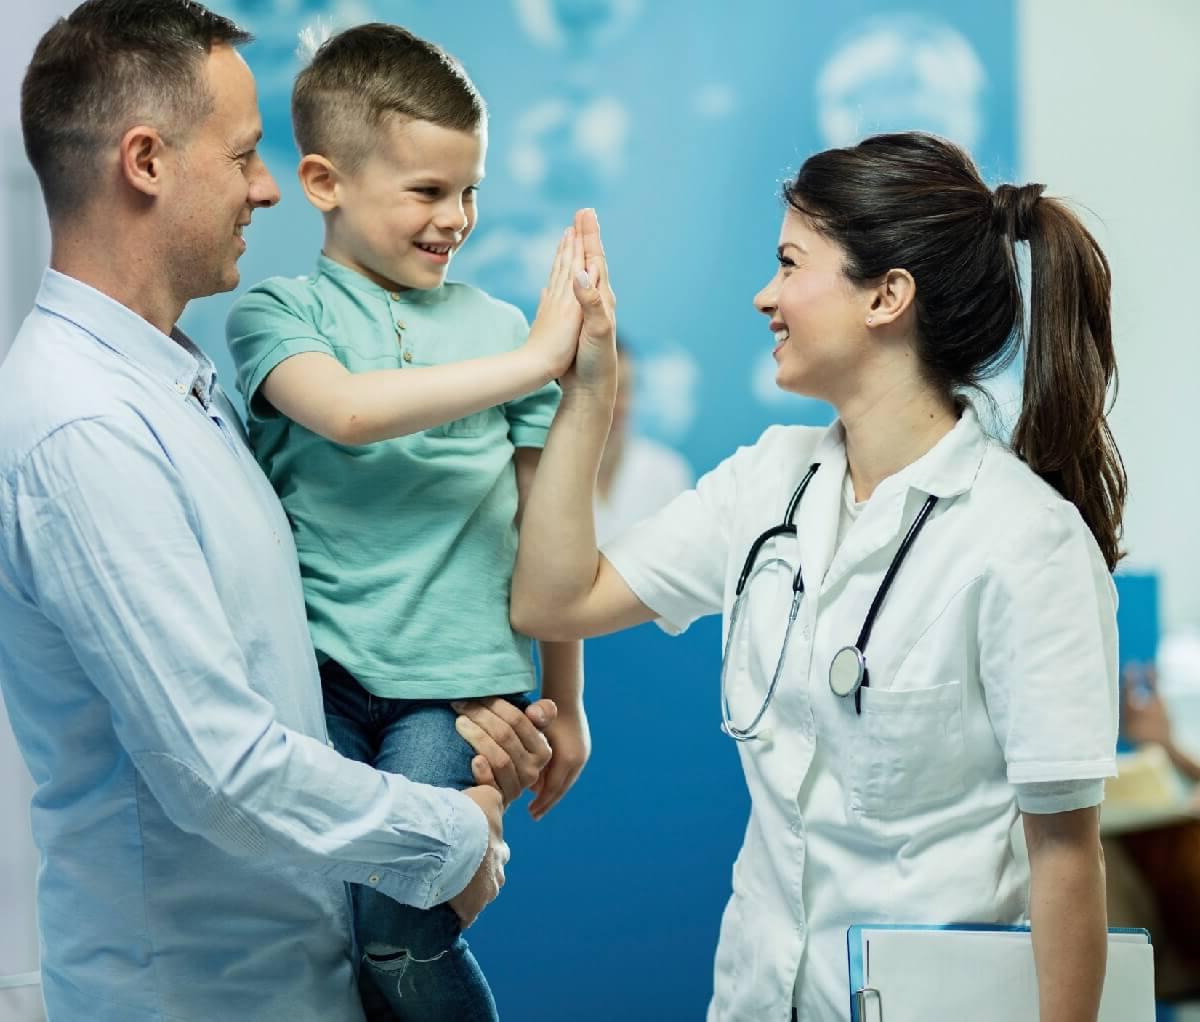 APRN with 邮报主人的 证书 High Fiving Child Patient